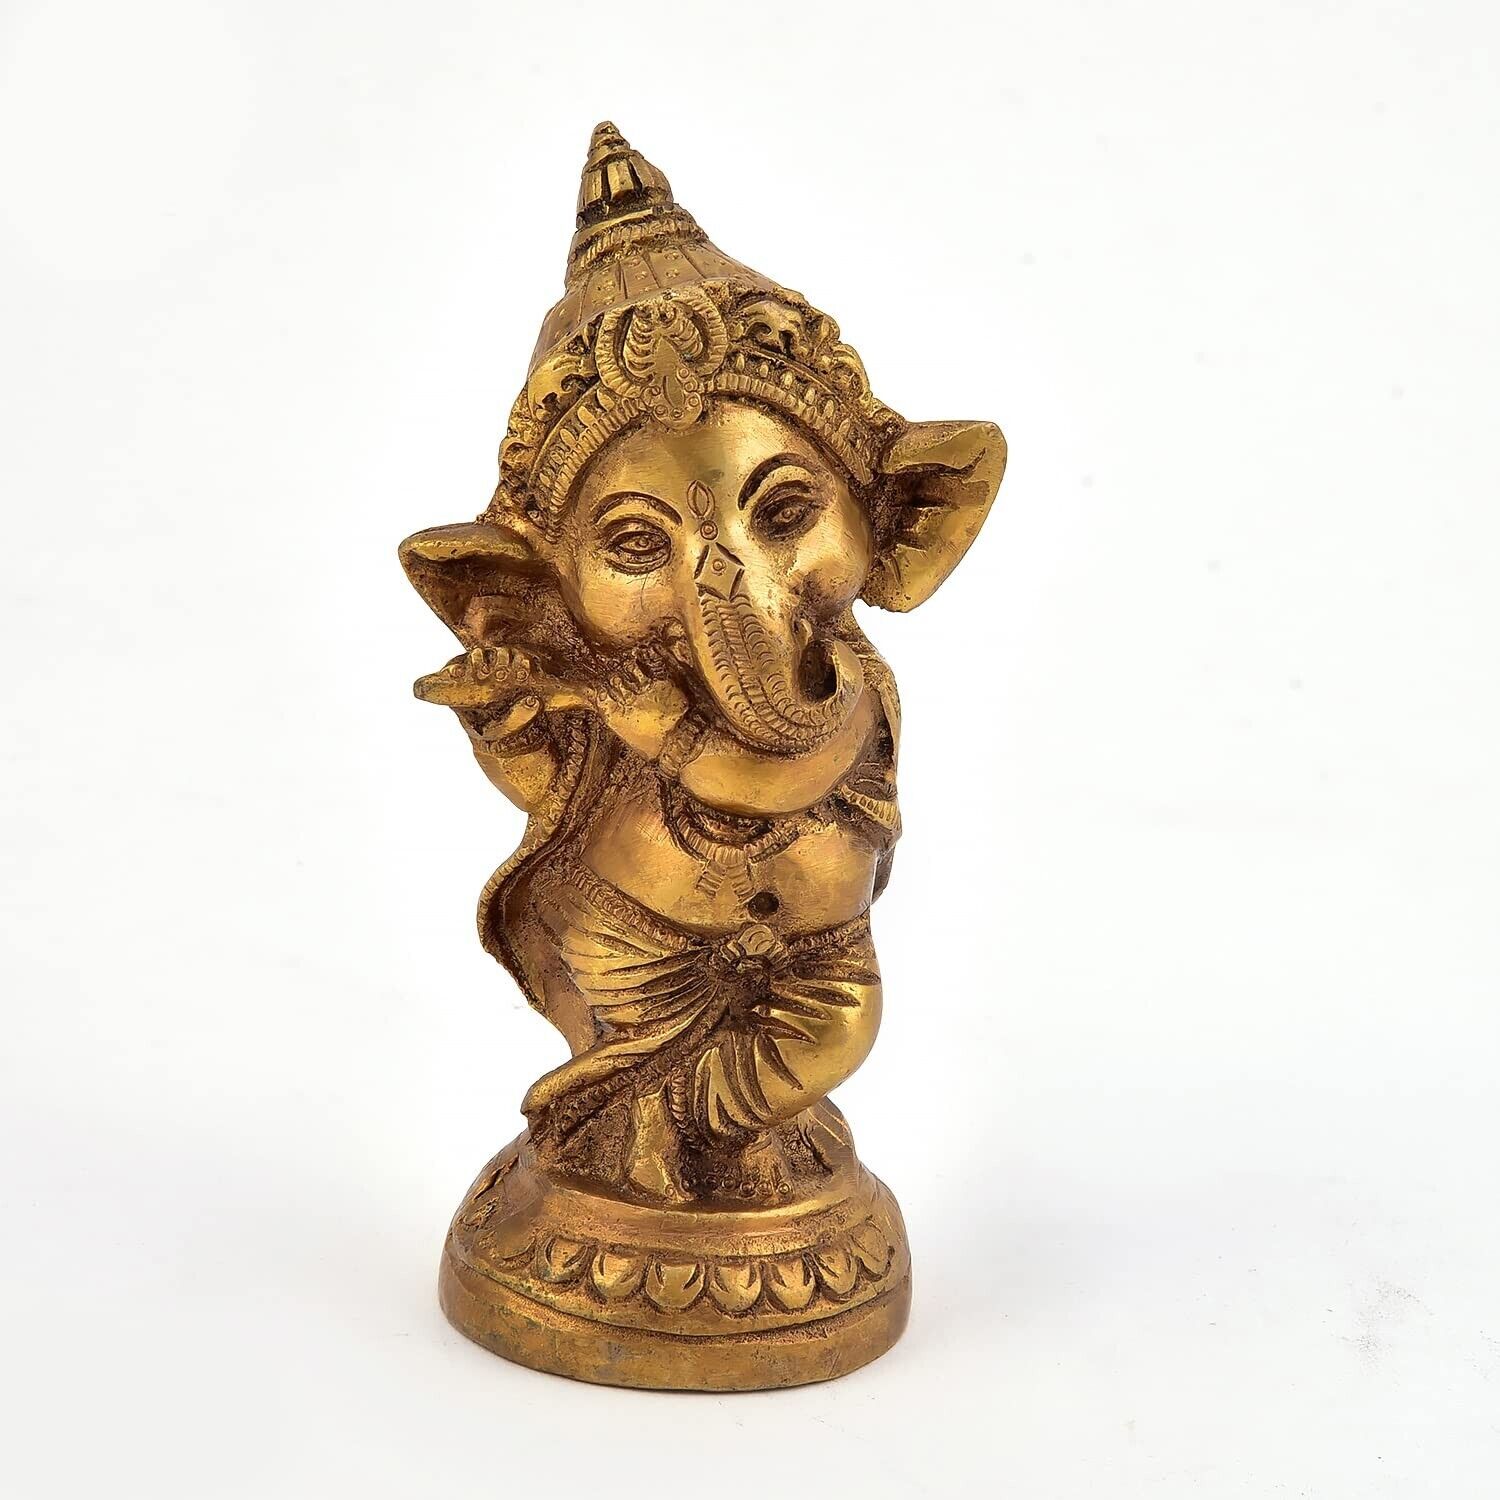 Brass Heavy Dancing Ganesh Idol and Figurines for Temple